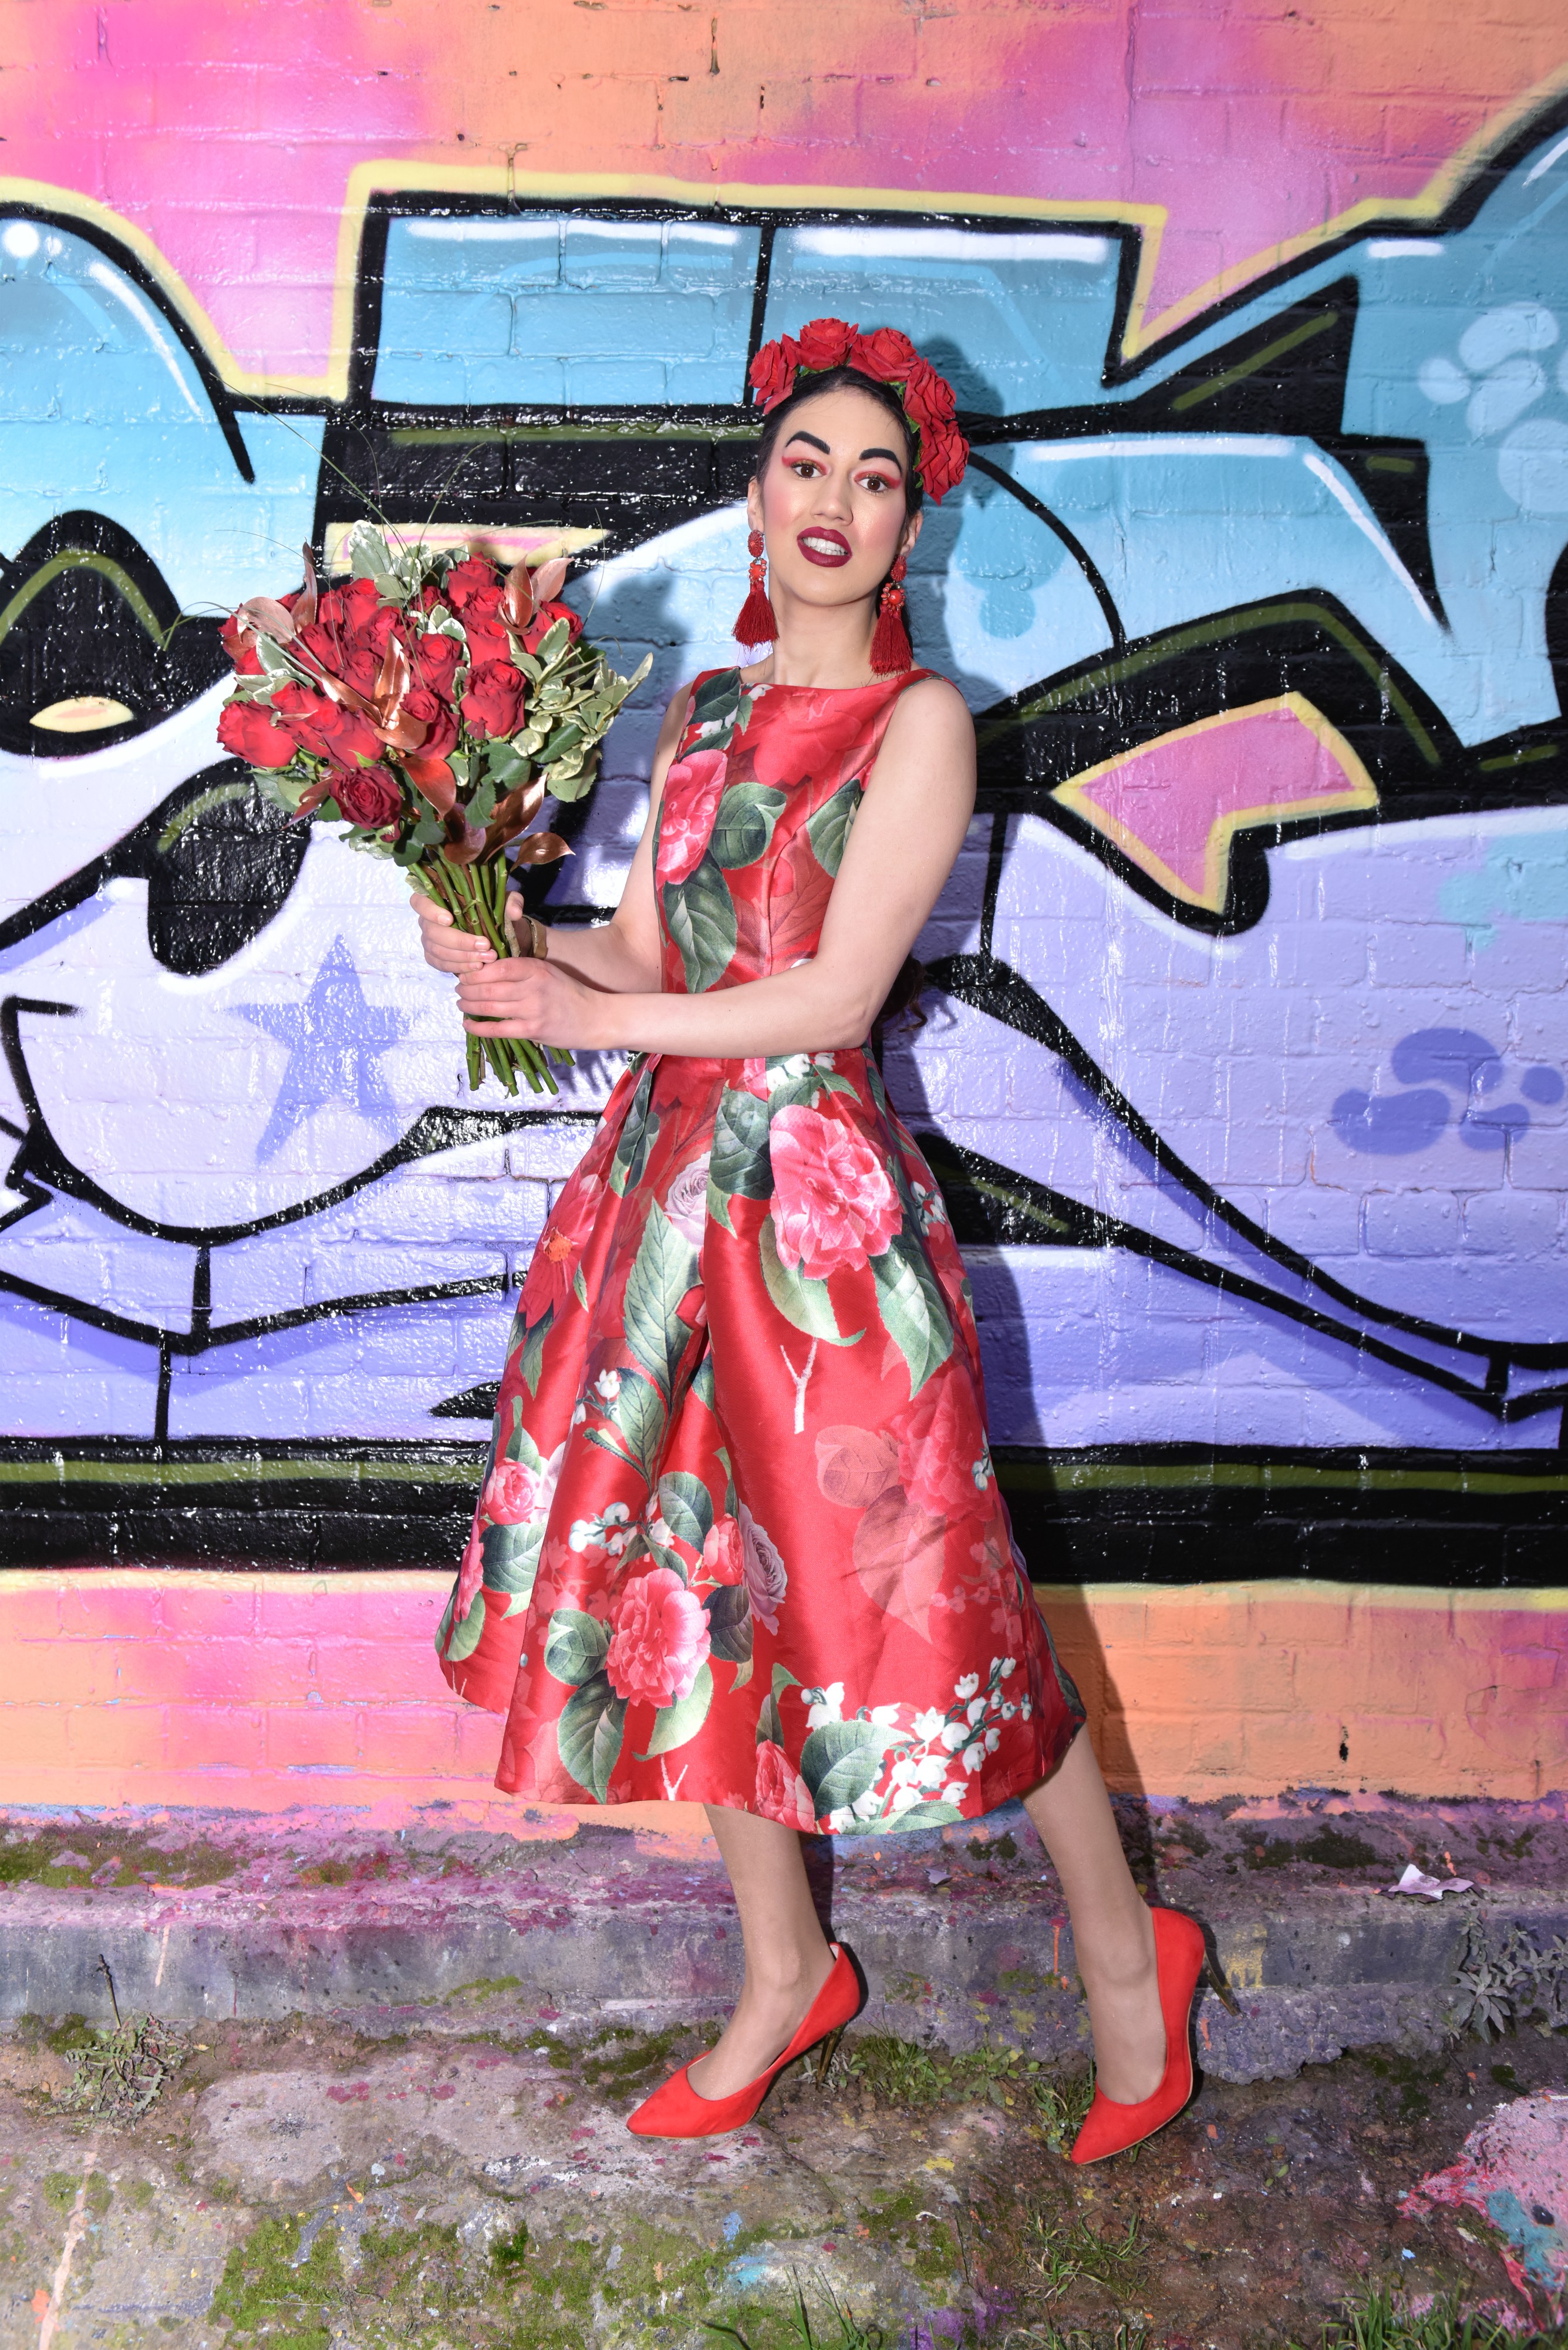 <img src="ana.jpg" alt="ana red roses and red dress dating dos and dont's"/> 